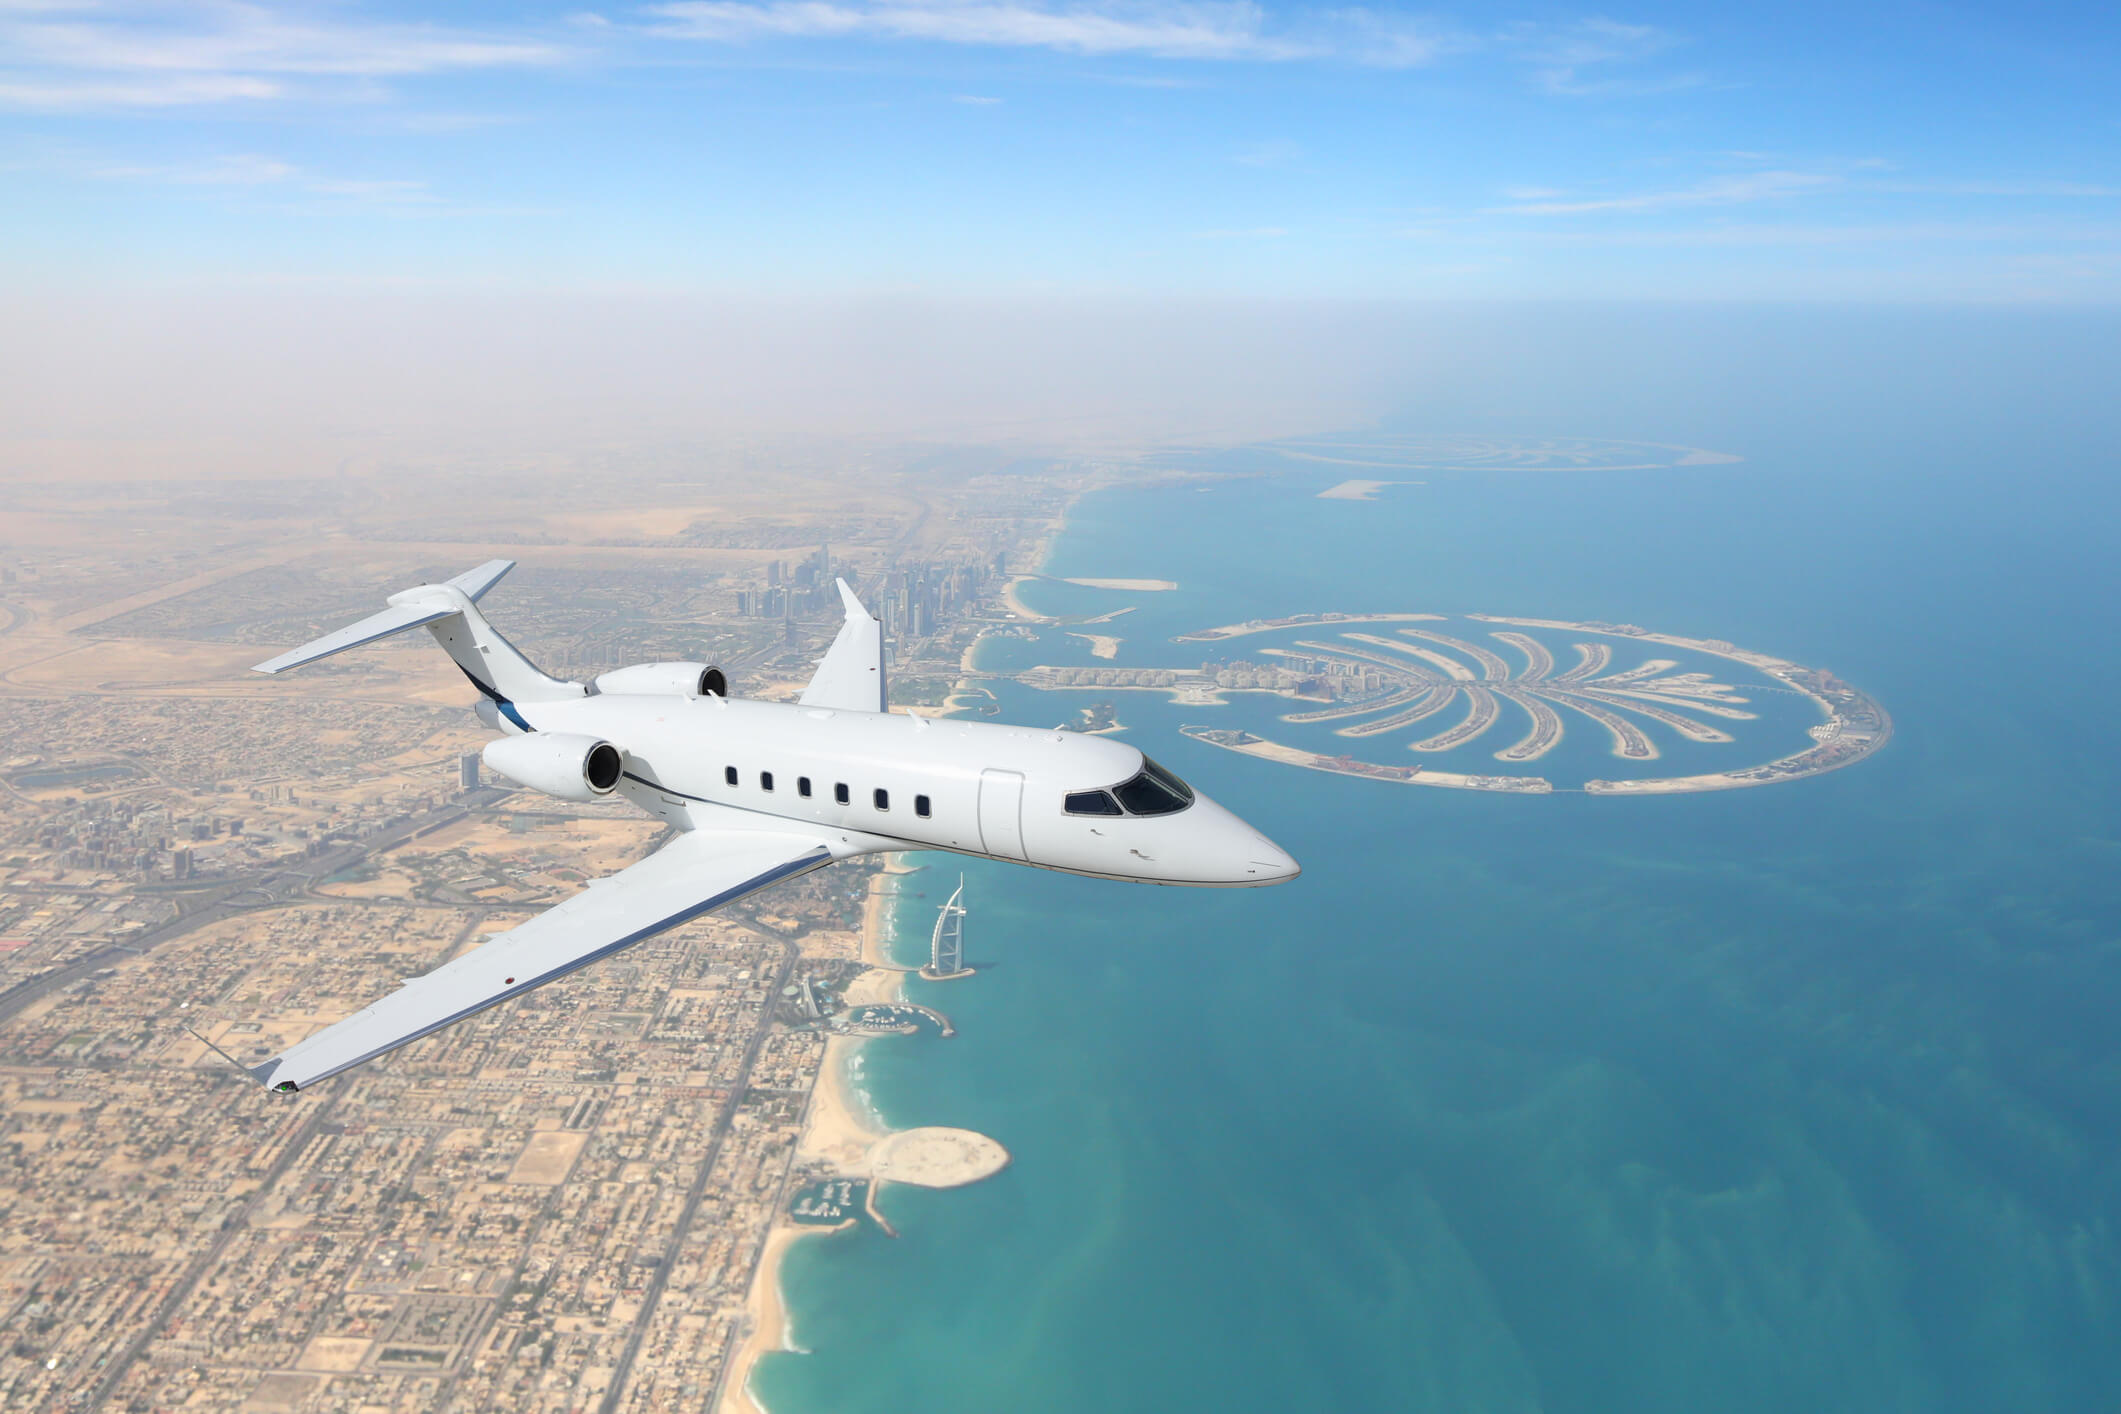 The Challenger 605 in the sky